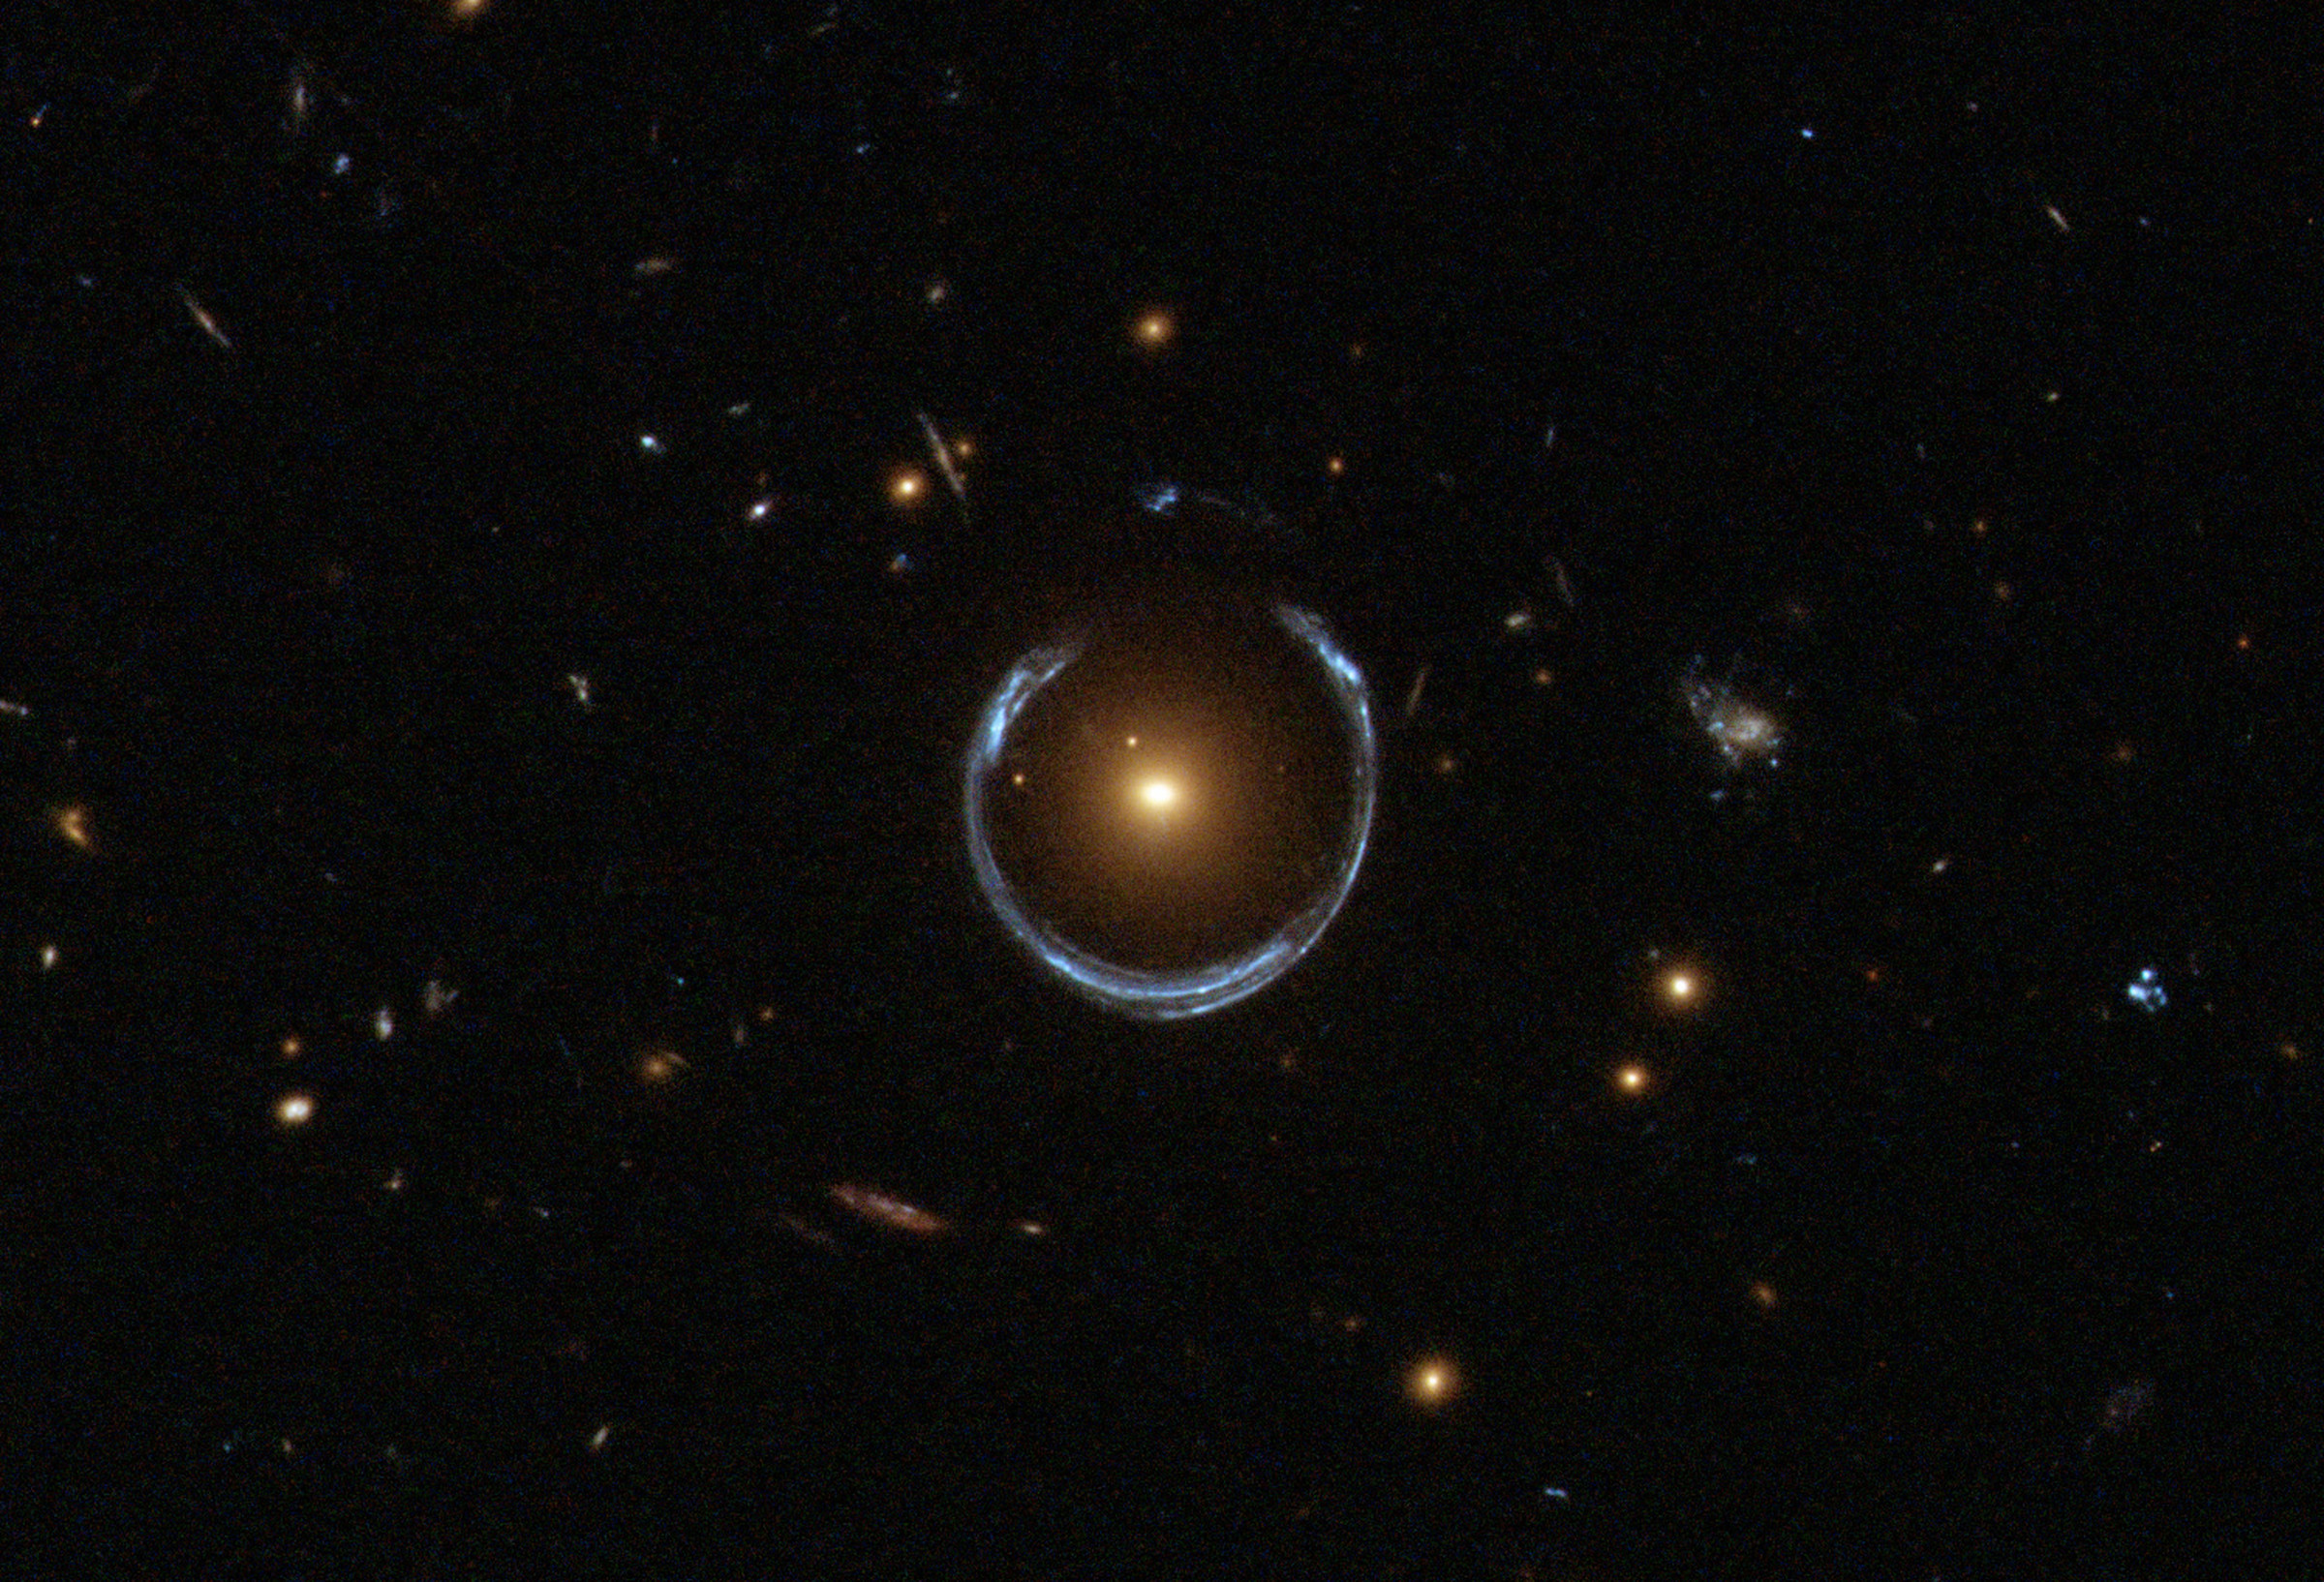 A gravitational lens. The nearer red galaxy has bent the light of the more distant blue galaxy around it in a horseshoe shape.